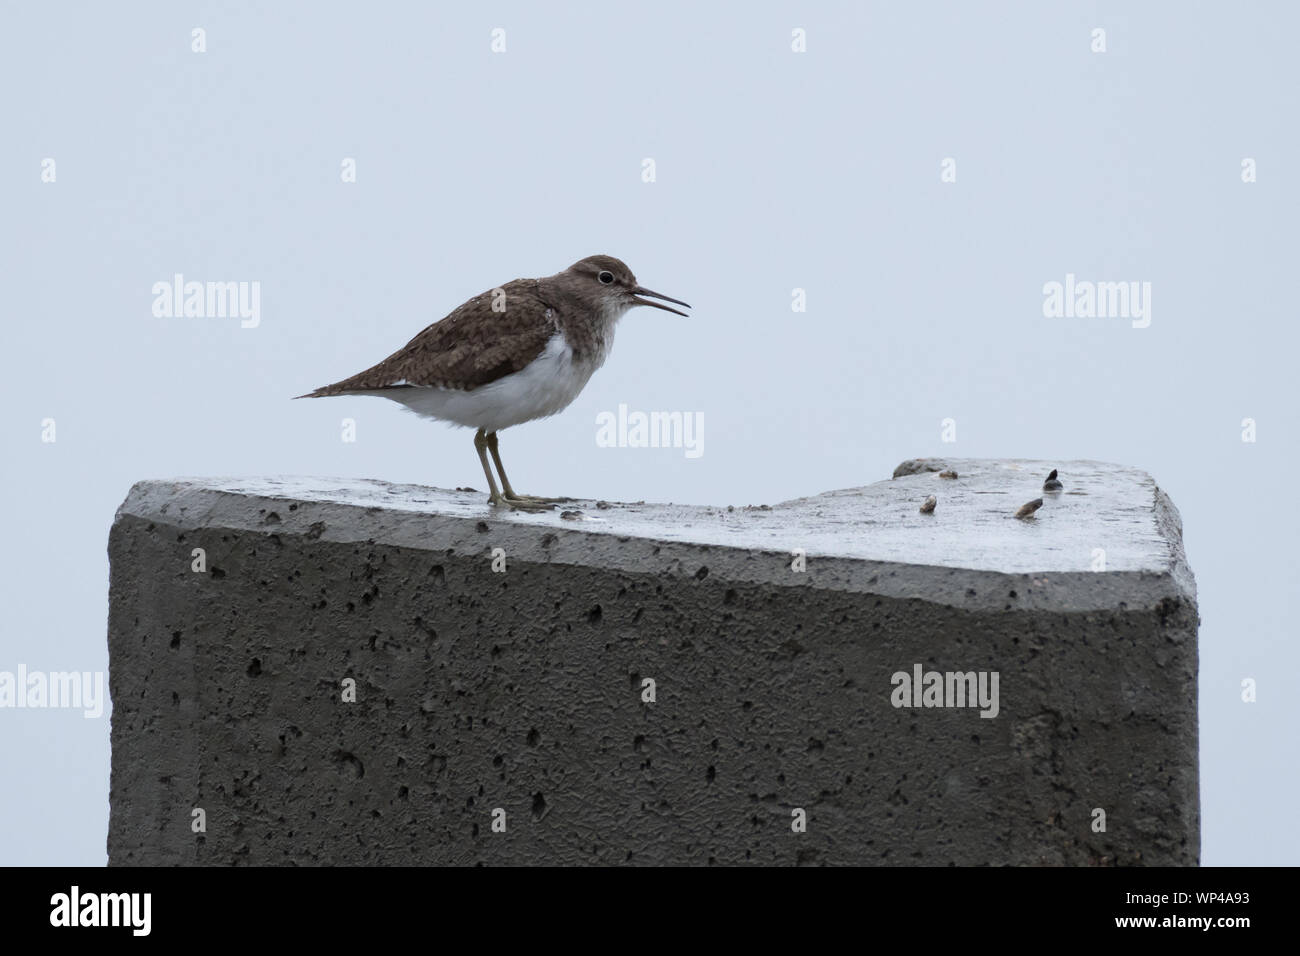 Common sandpiper (Actitis hypoleucos) sitting on a concrete pole during rainy weather. Finland, June 2018 Stock Photo